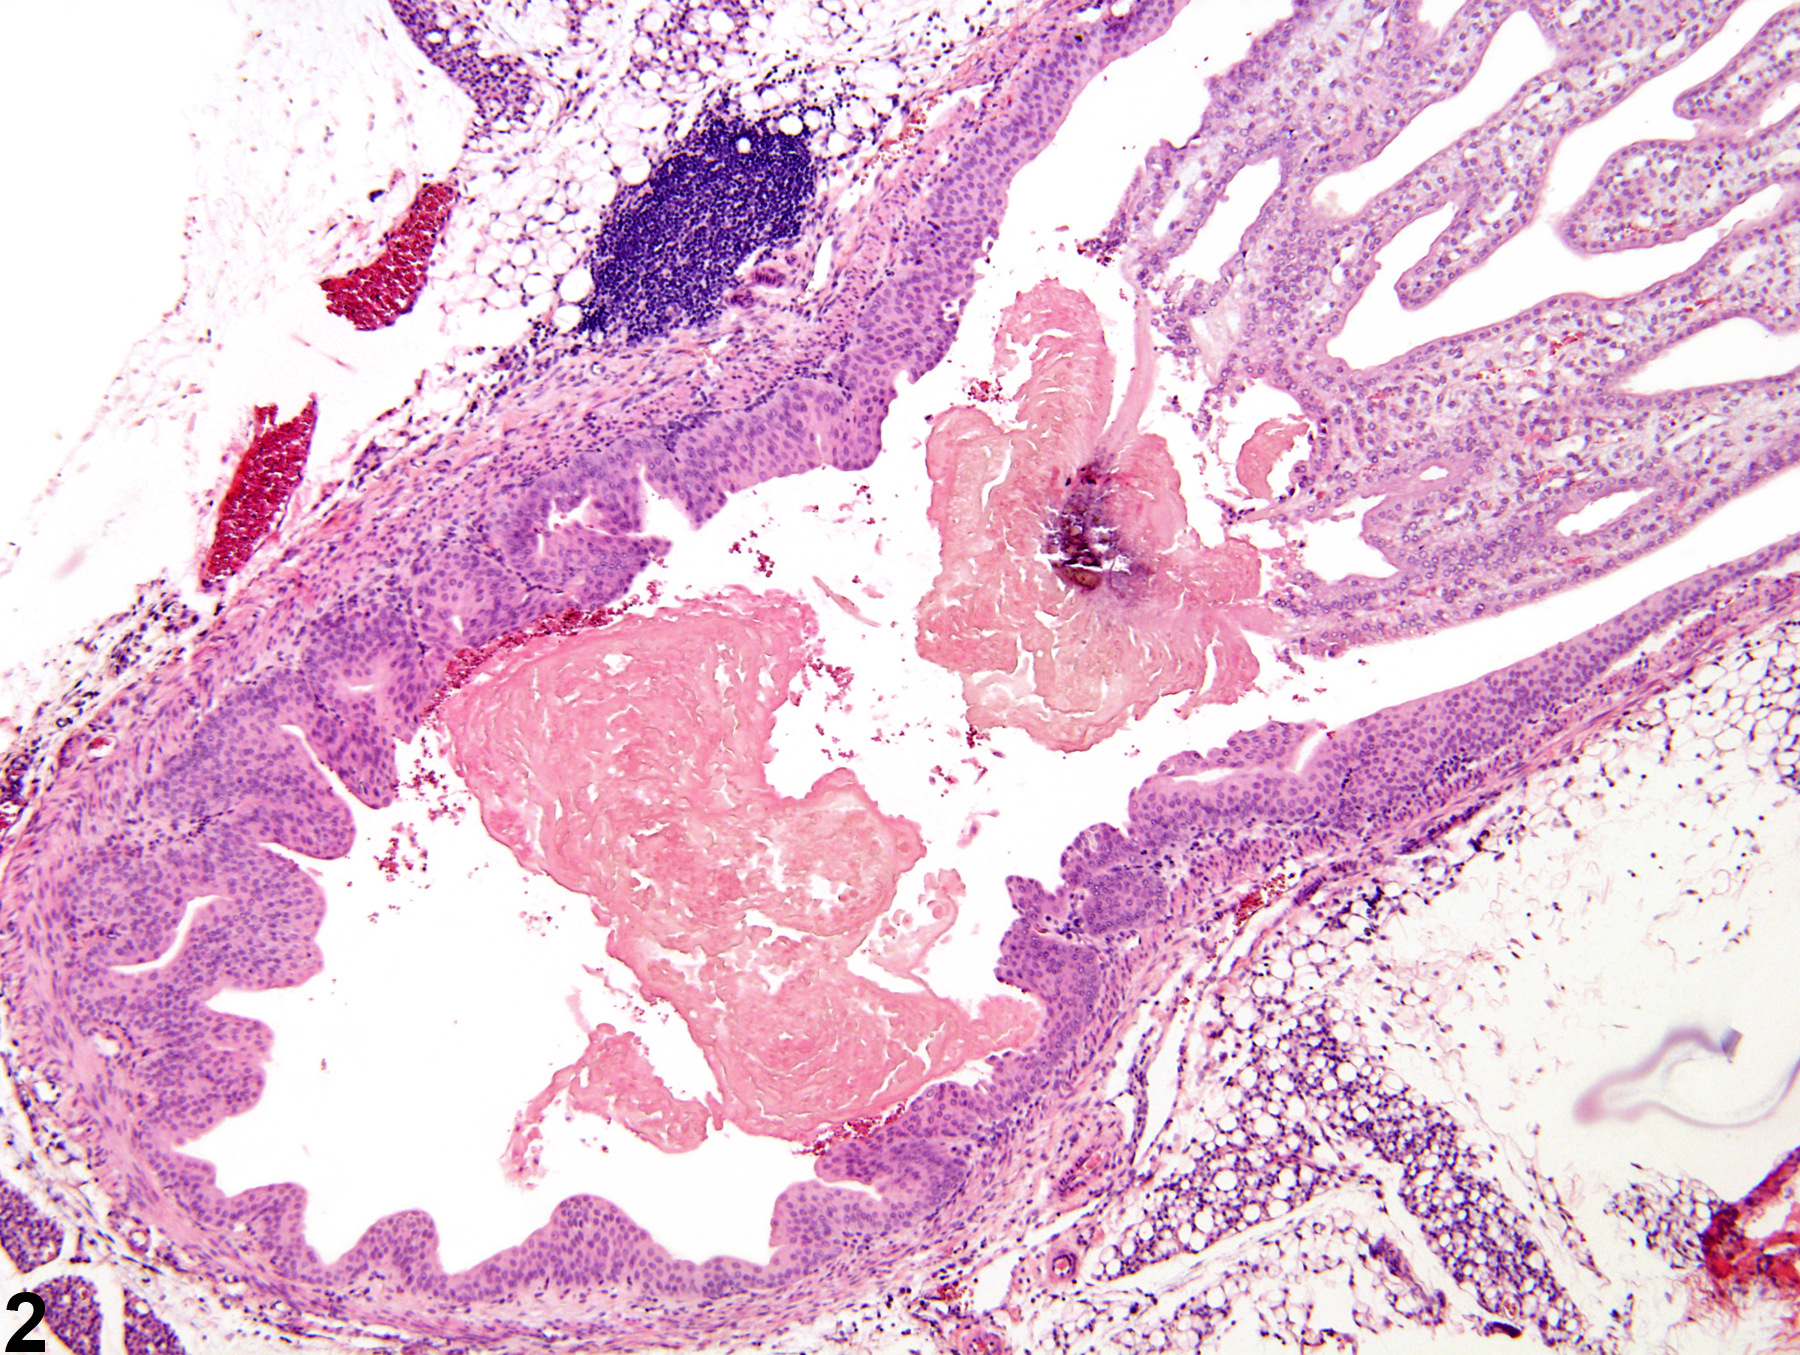 Image of papilla necrosis in the kidney from a male F344/N rat in a subchronic study